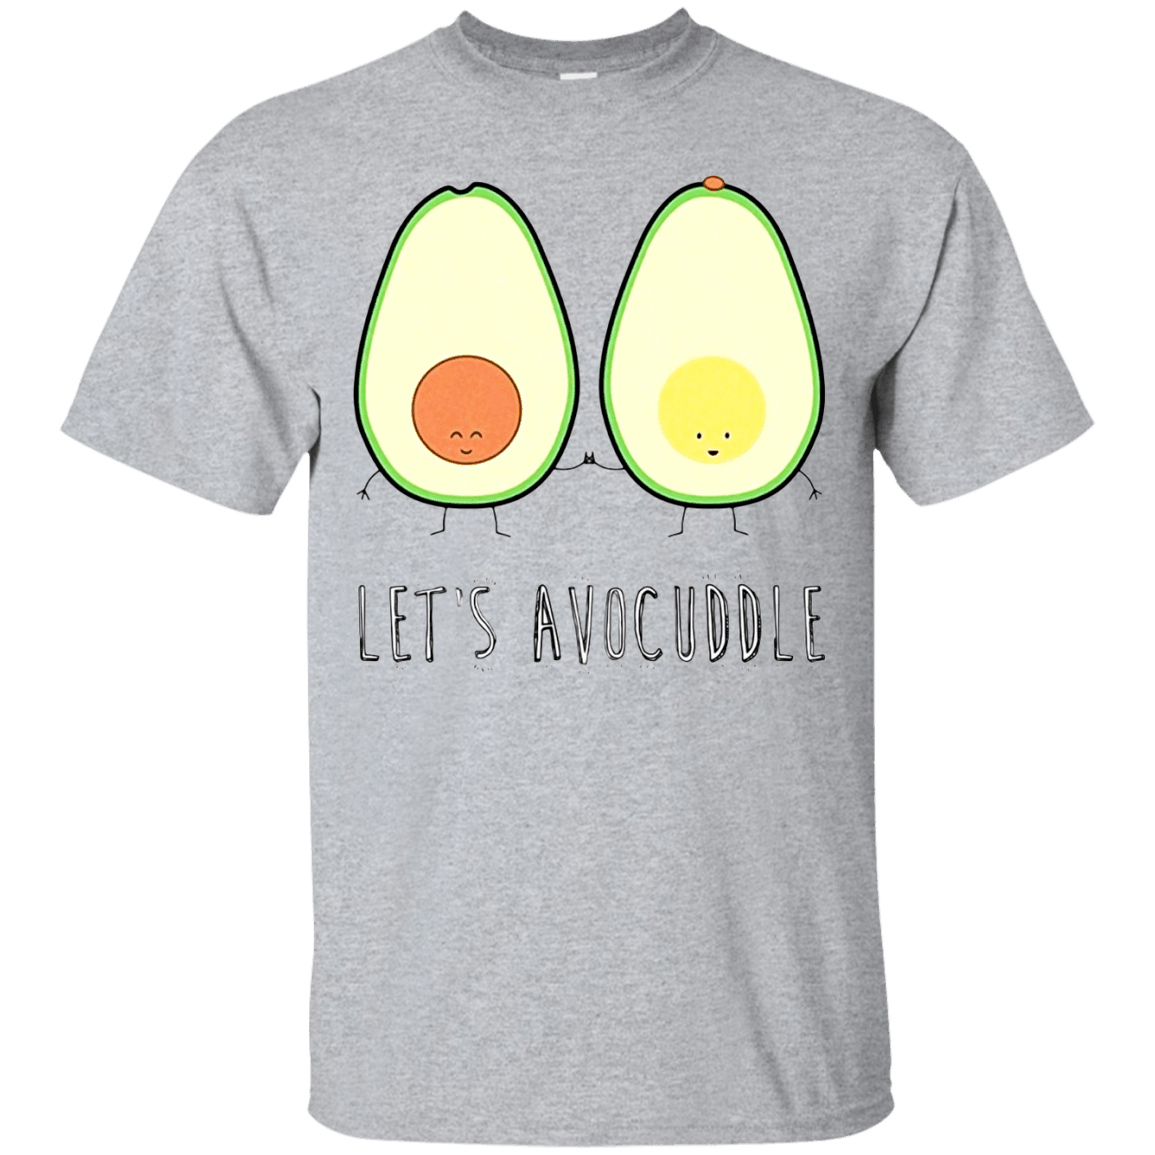 Lets Avocuddle Avocado Lovers T-Shirt – Wow Clothes